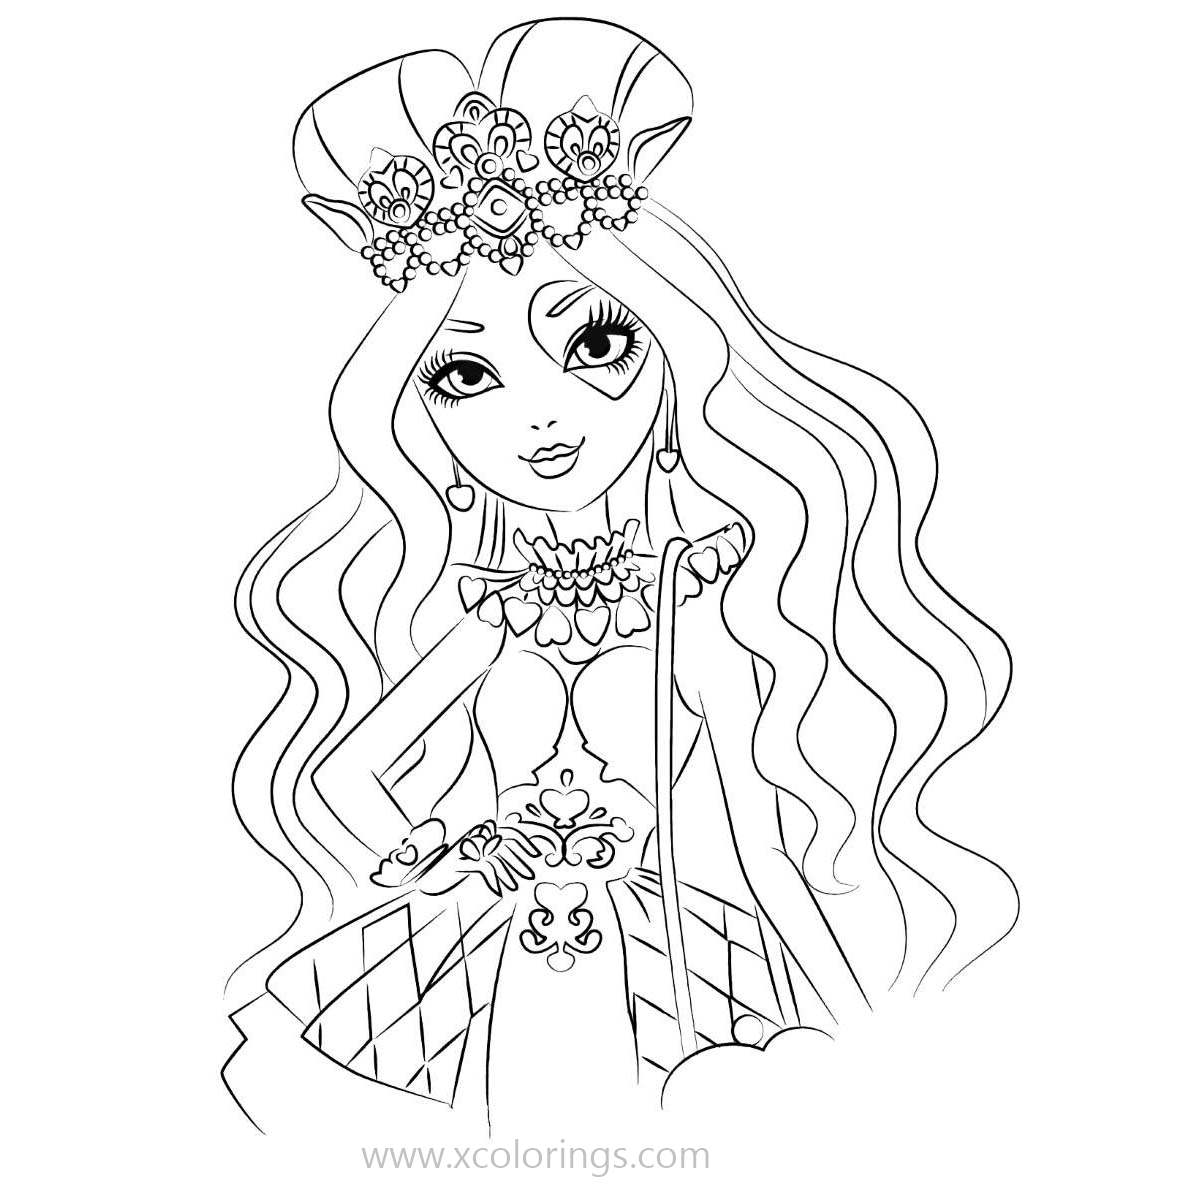 Ever After High Coloring Pages Lizzie Hearts - XColorings.com